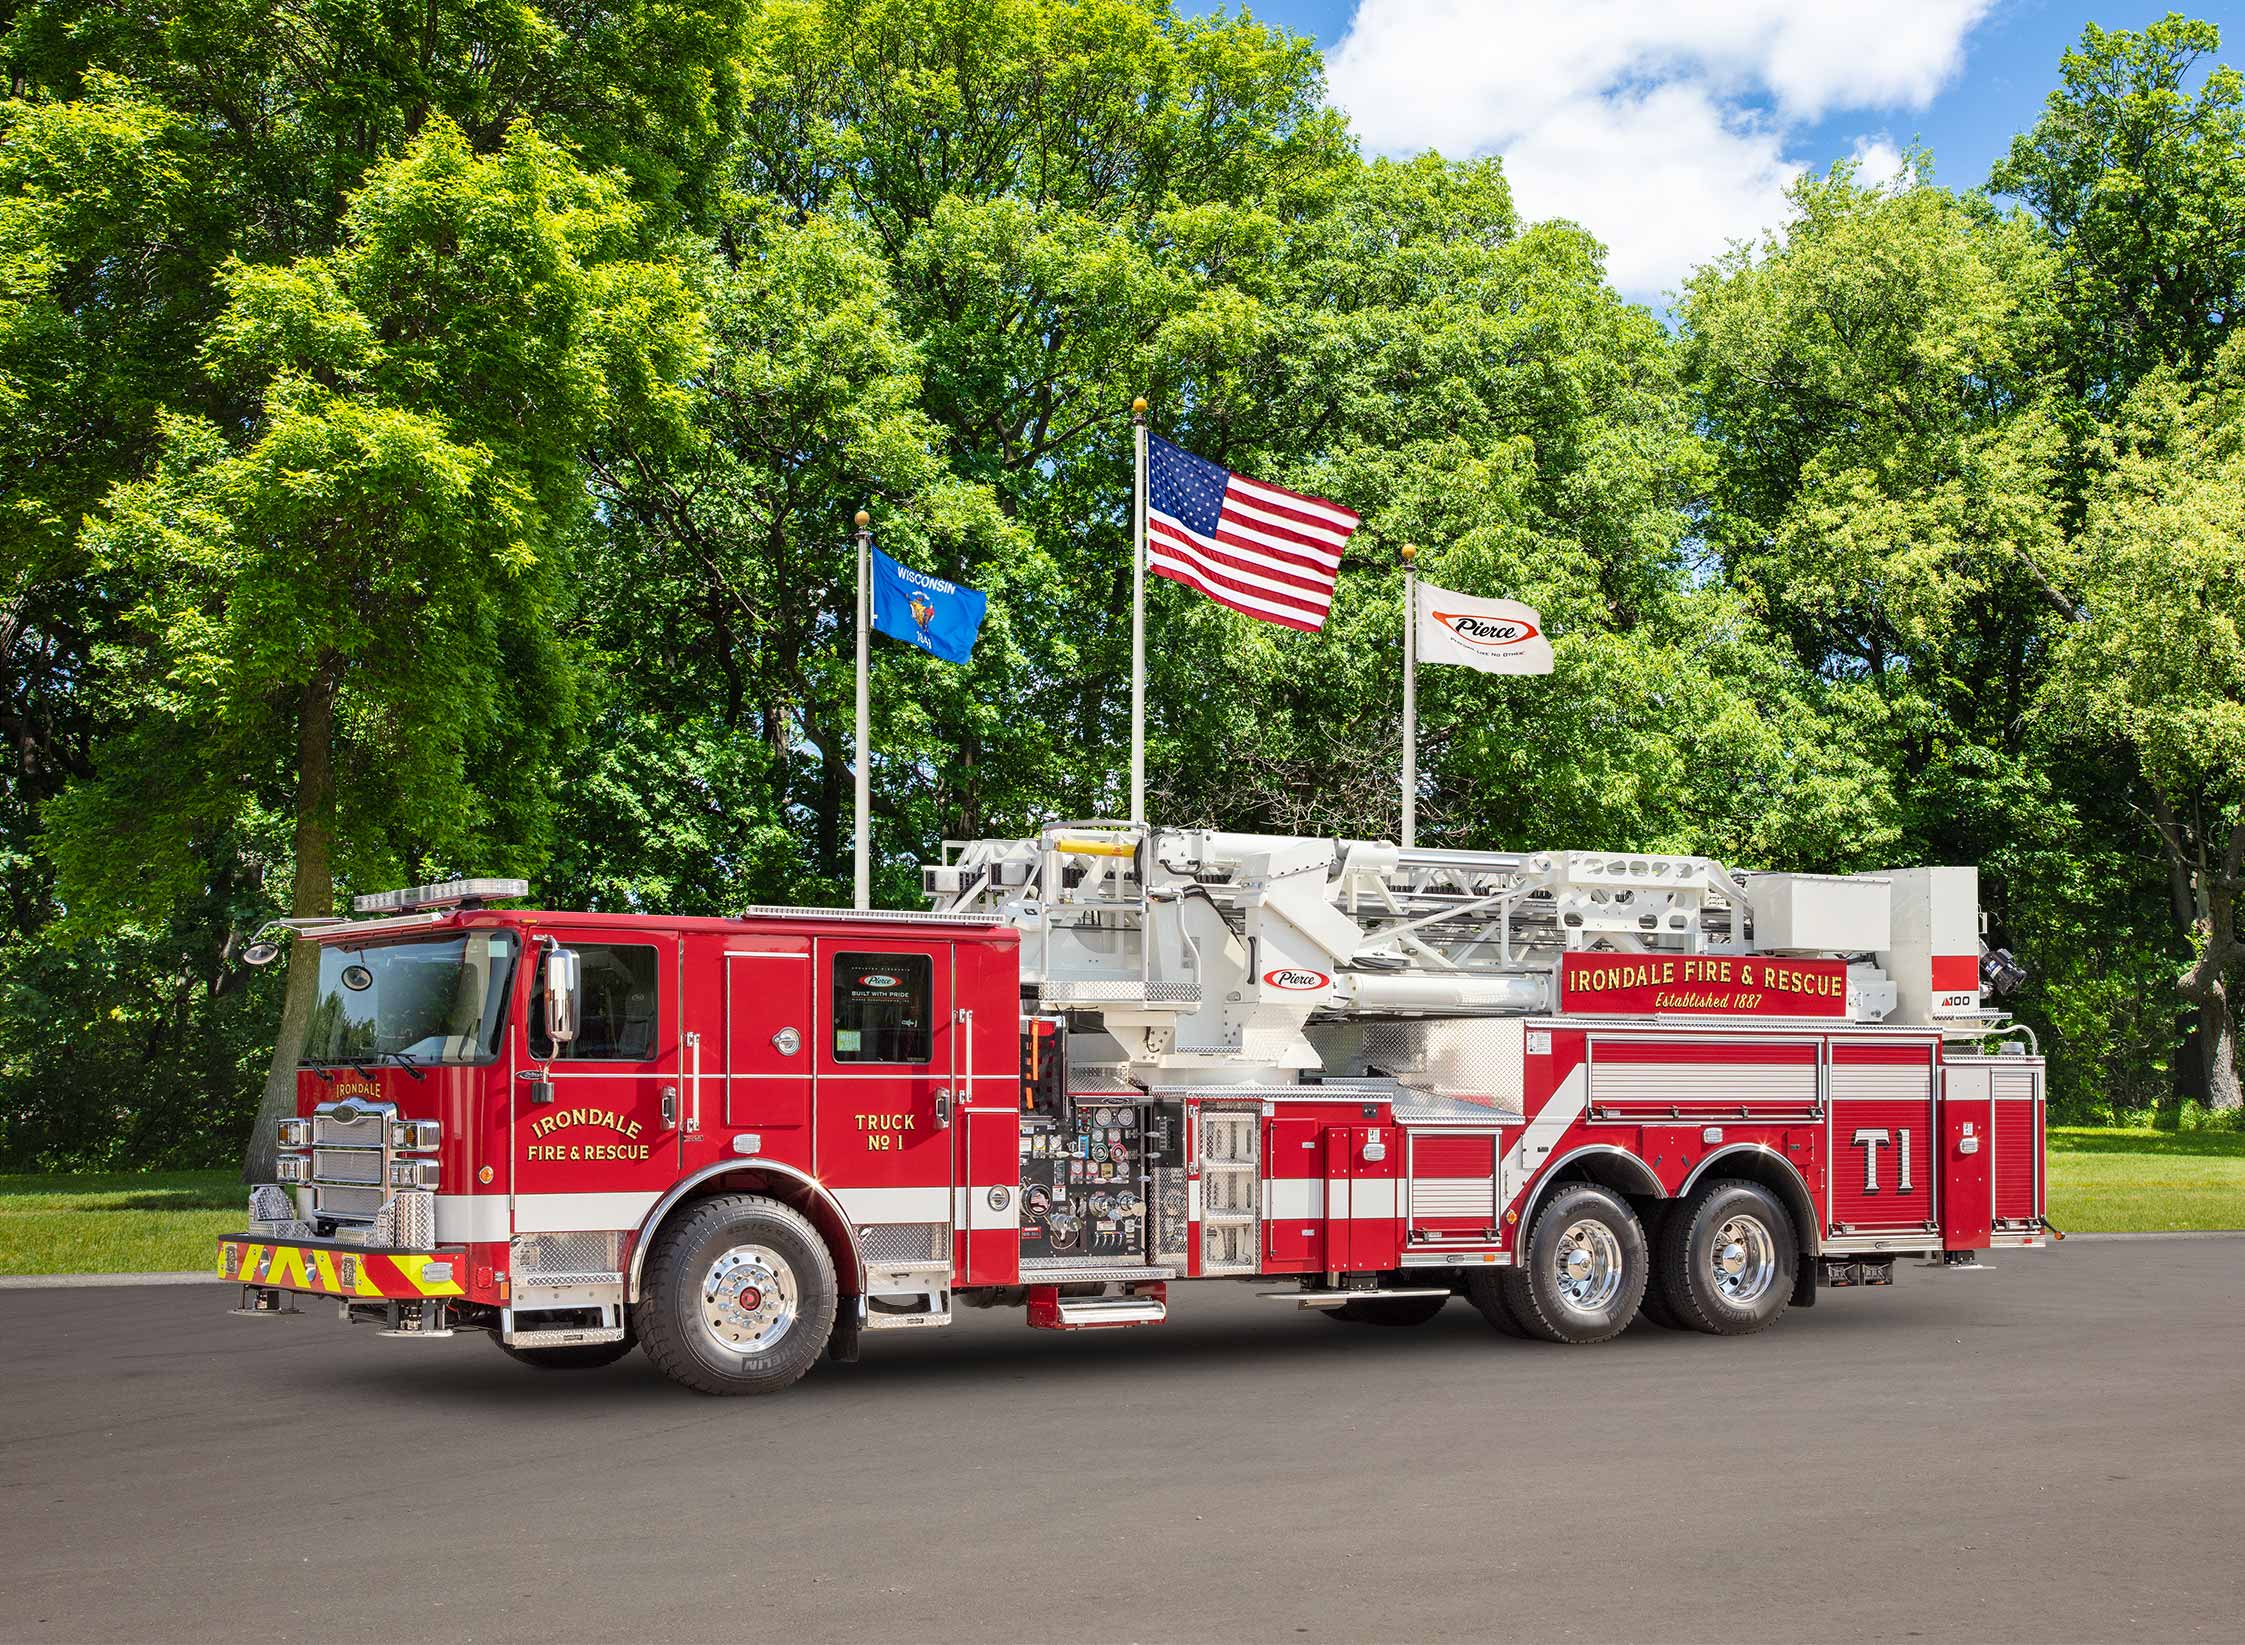 Irondale Fire Department - Aerial